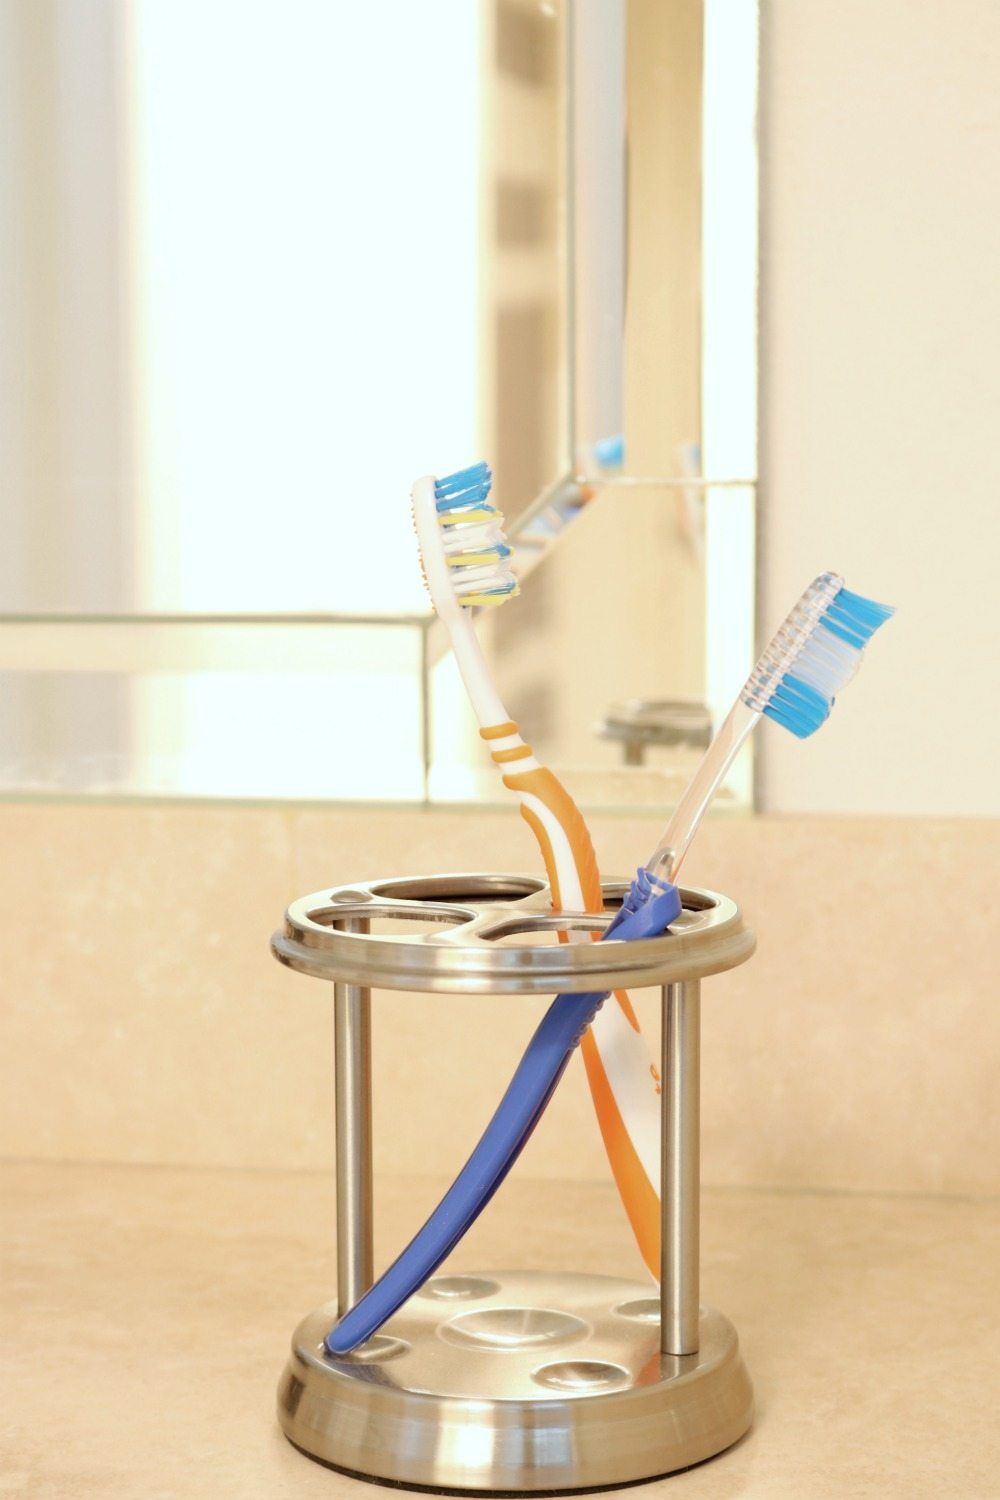 Have a place for the guest to put their toothbrush but keep it simple and easy to clean